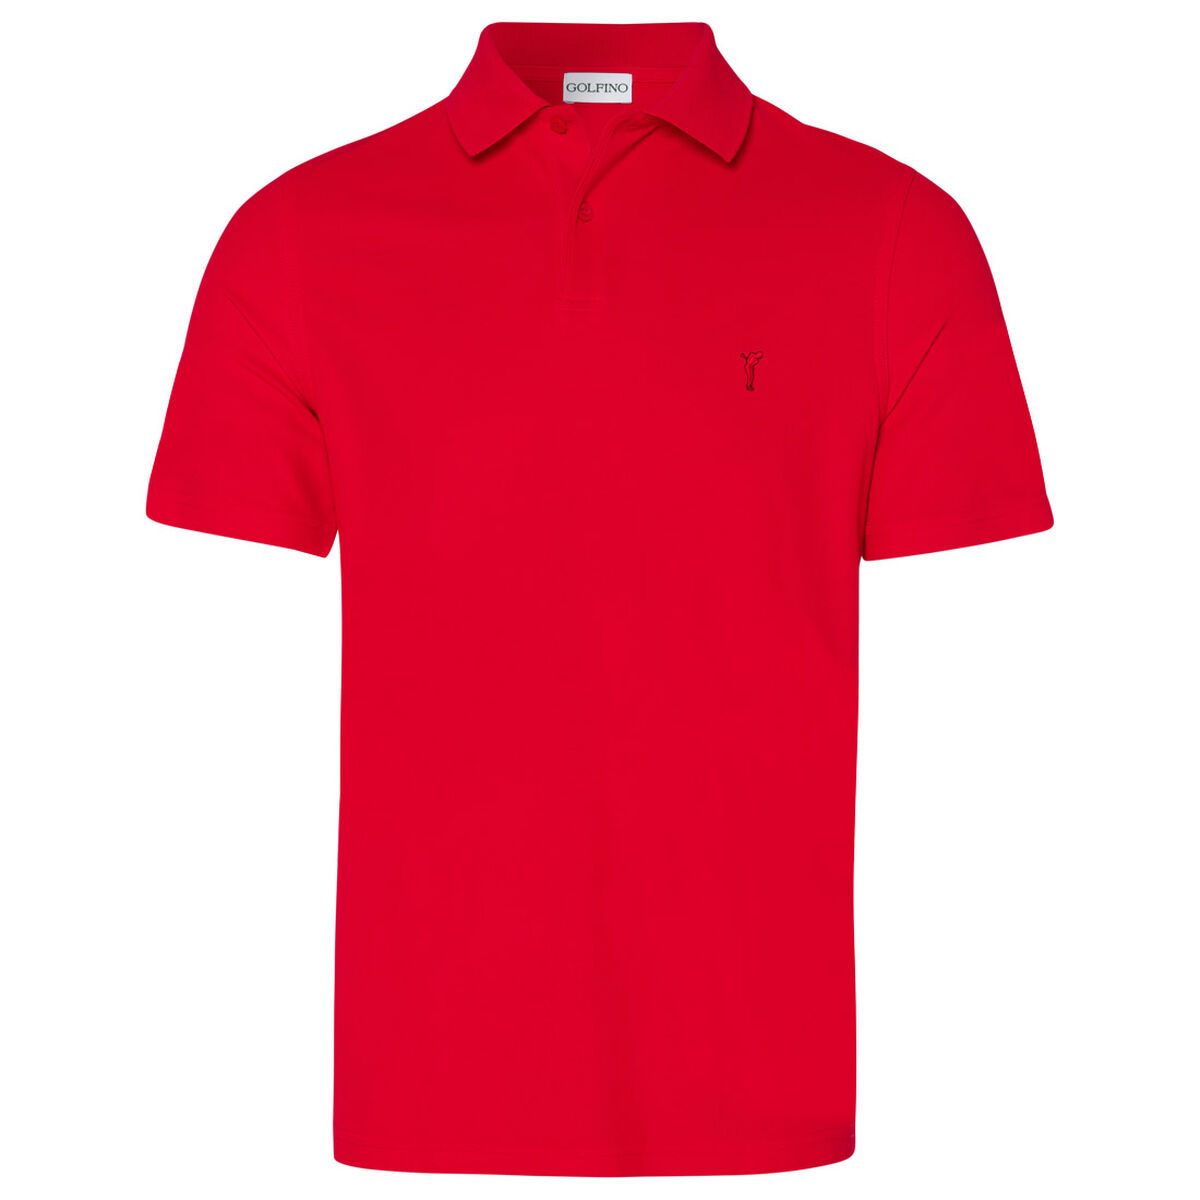 Polo GOLFINO Marbella, homme, XL, Rouge | Online Golf